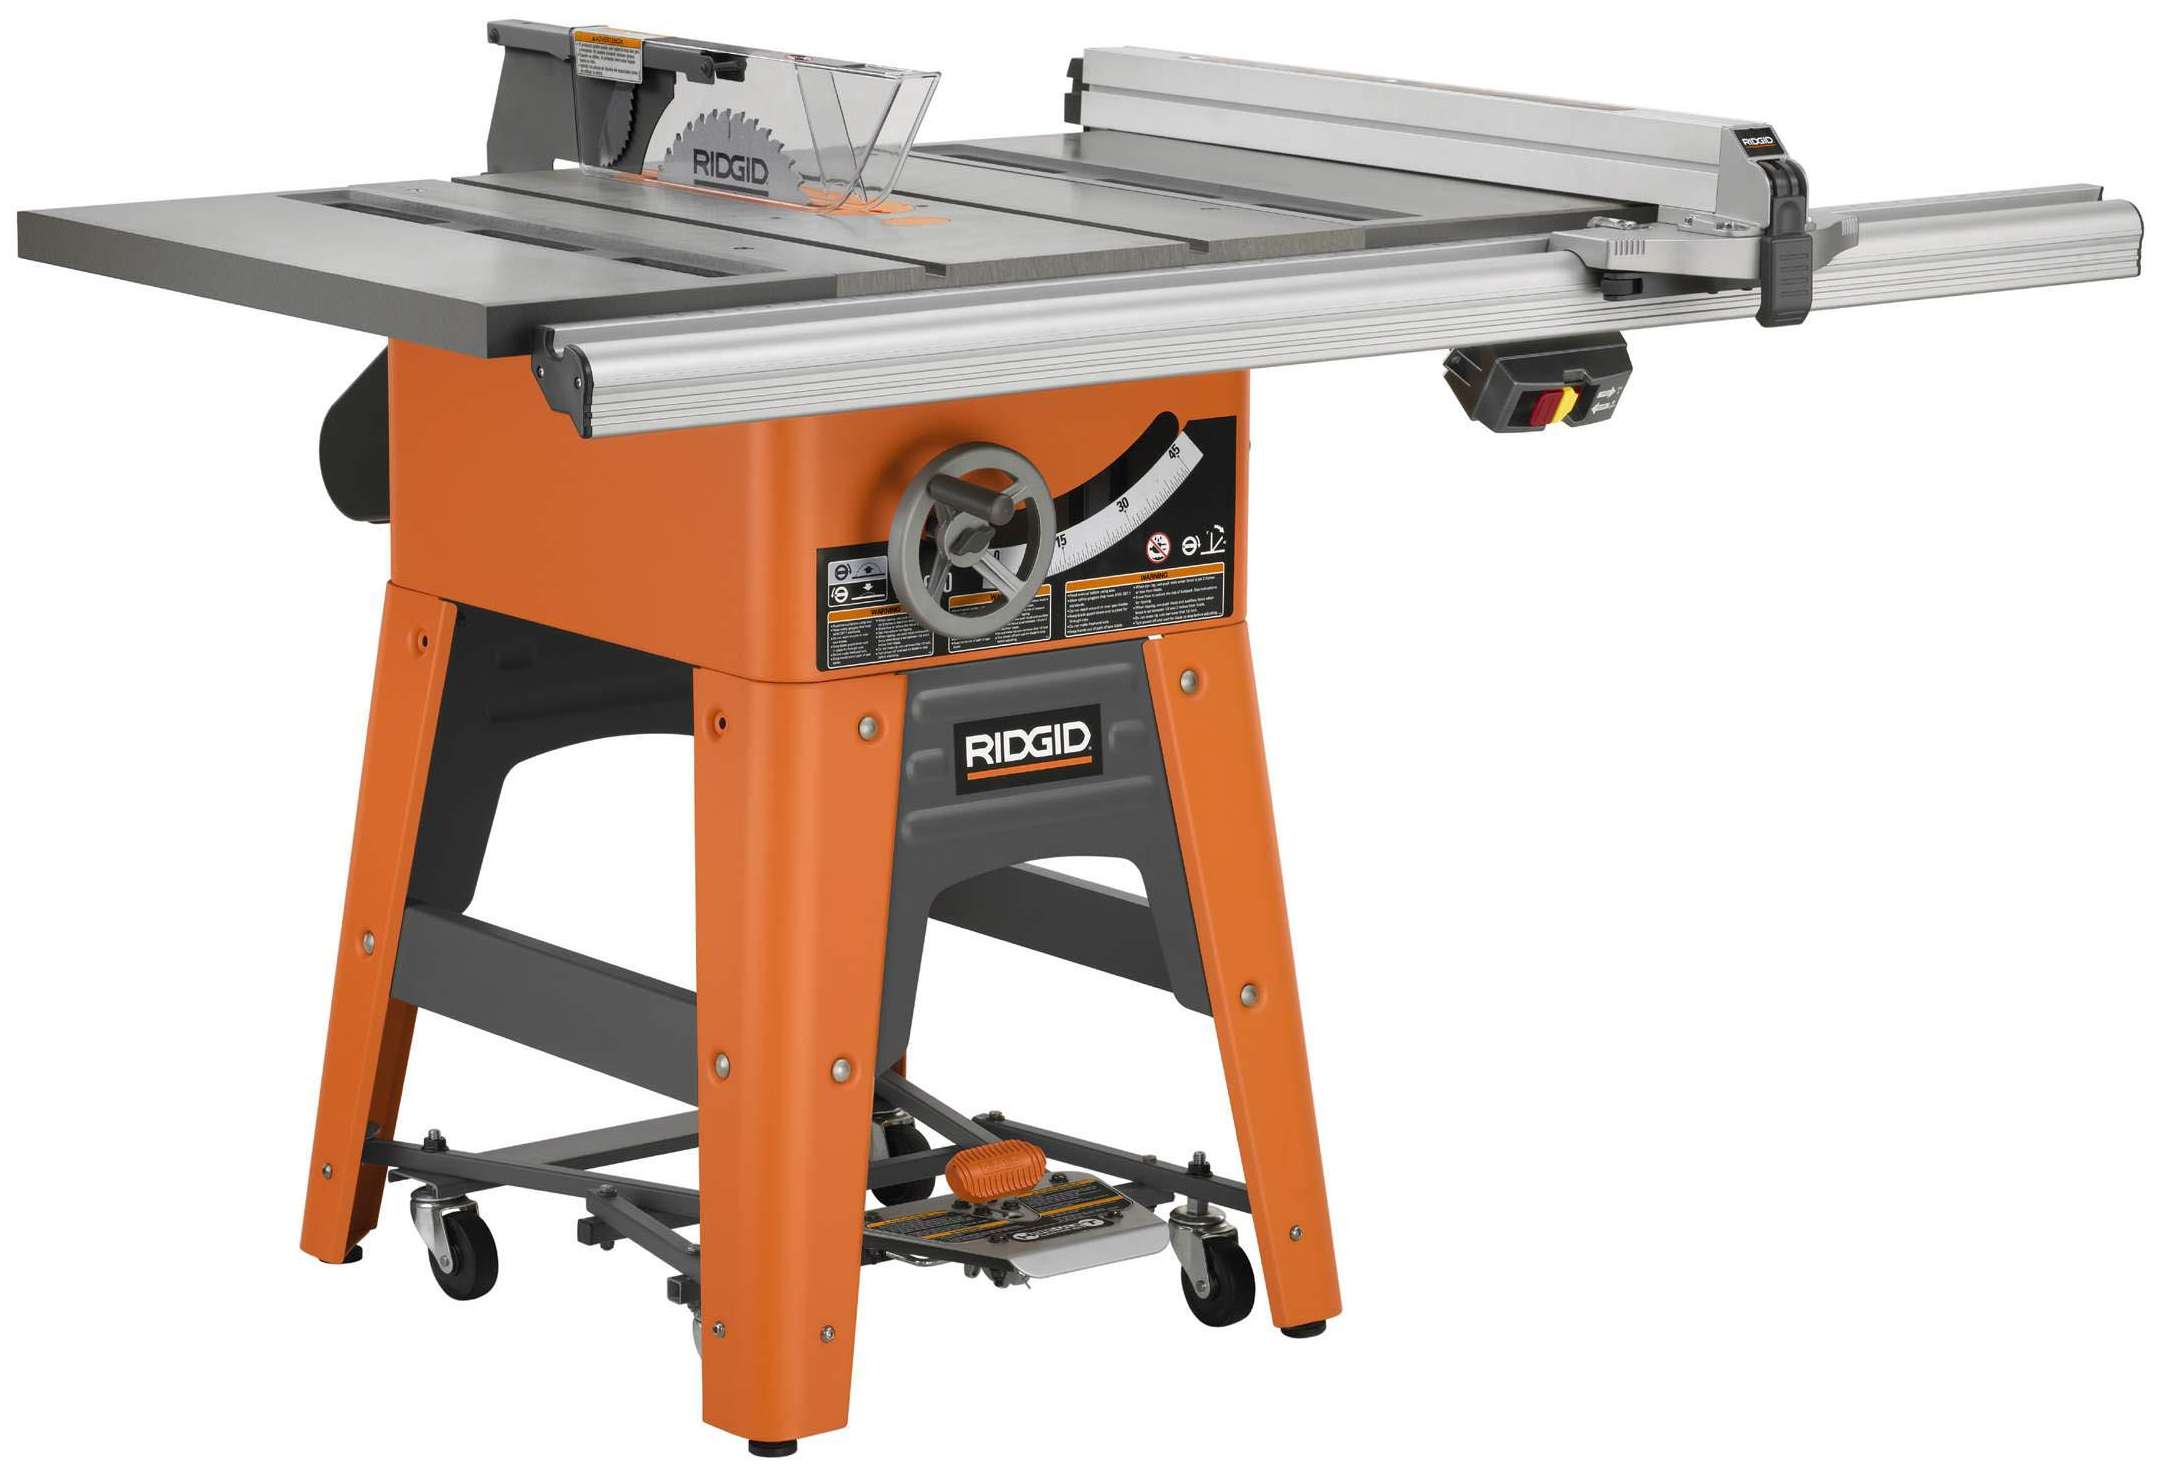 Table saw for woodworking